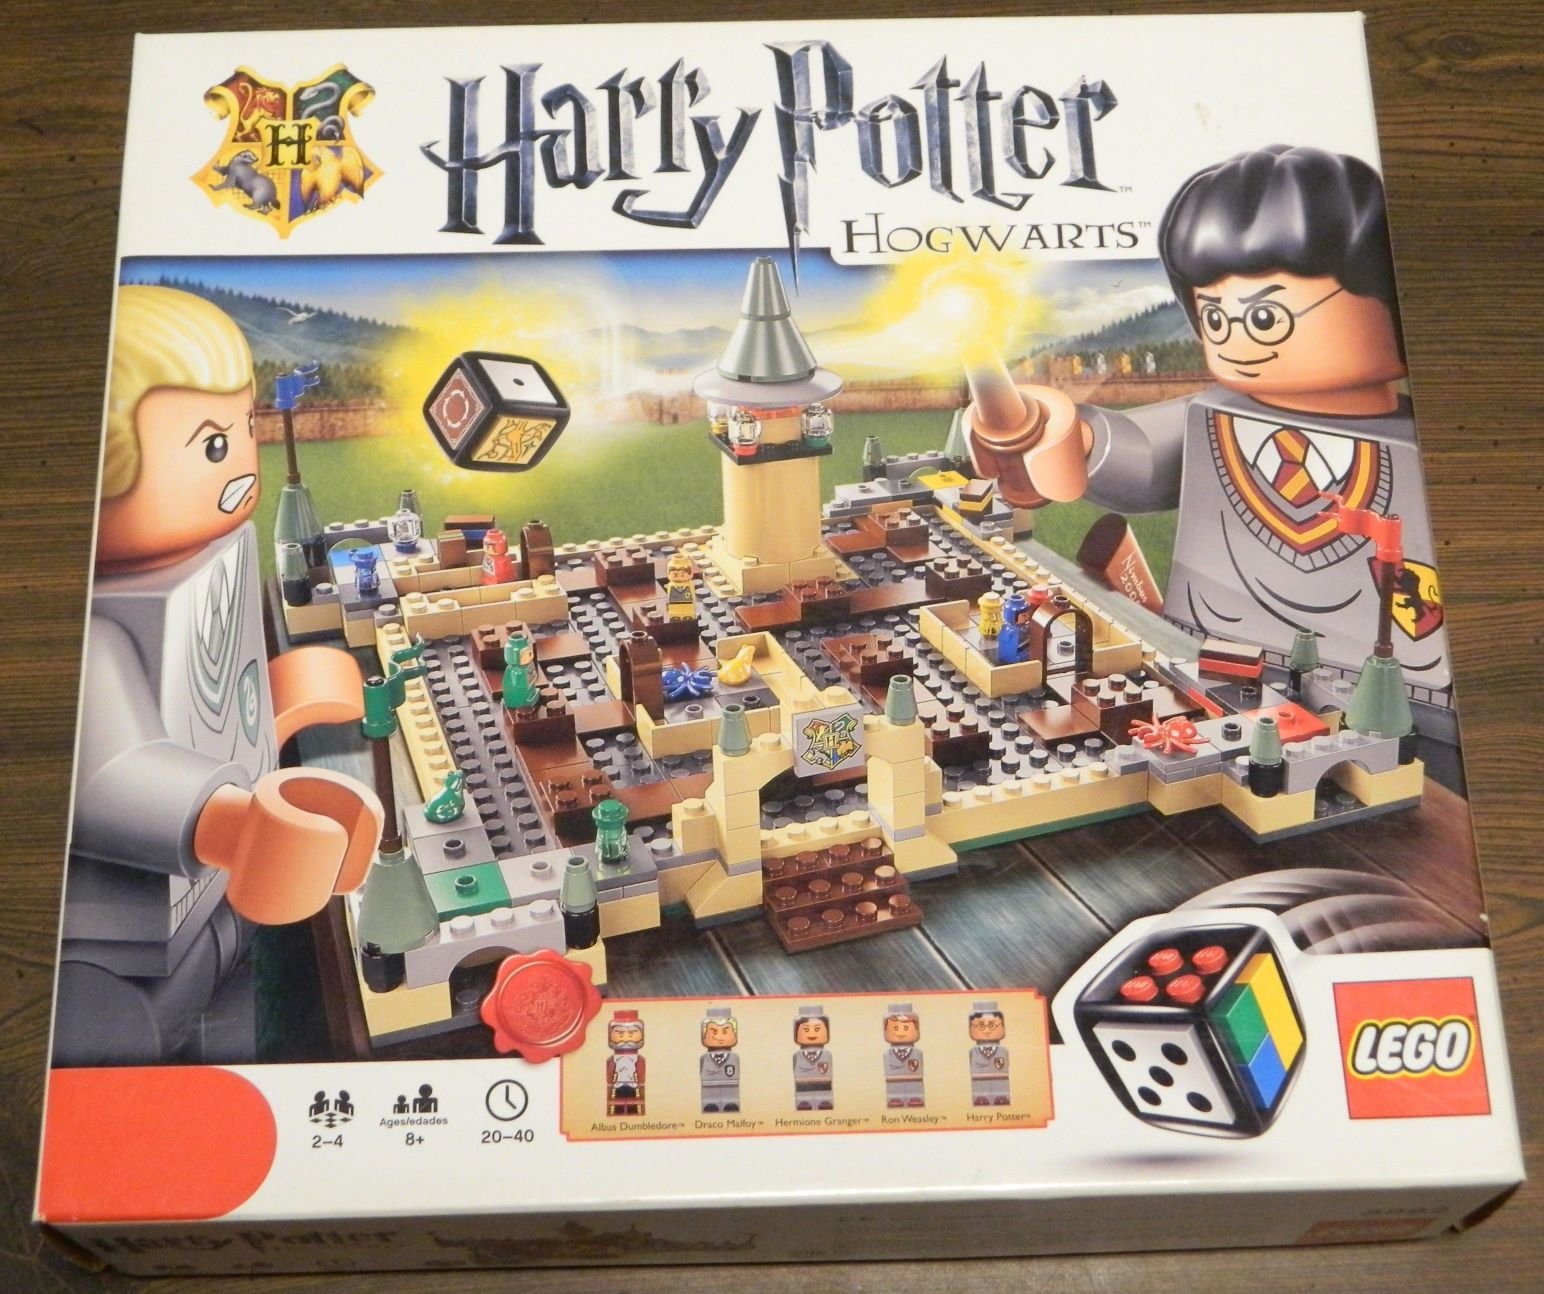 LEGO Harry Potter Hogwarts Review and Rules